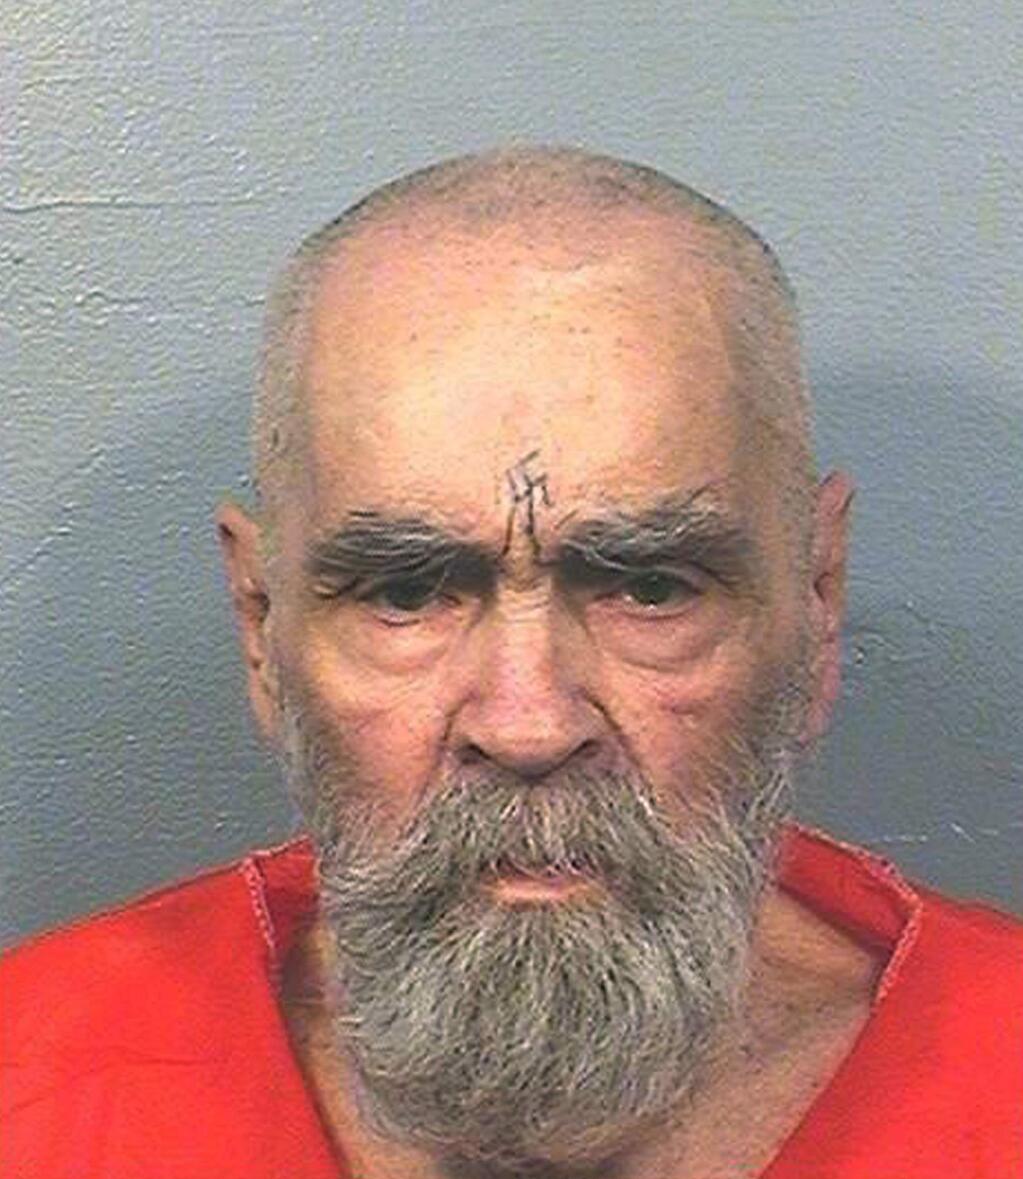 FILE - This Aug. 14, 2017 file photo provided by the California Department of Corrections and Rehabilitation shows Charles Manson. On Tuesday, May 8, 2018, a purported son of Manson dropped his fight for the killer's estate and another possible heir is in jeopardy of being booted from the case. (California Department of Corrections and Rehabilitation via AP, File)